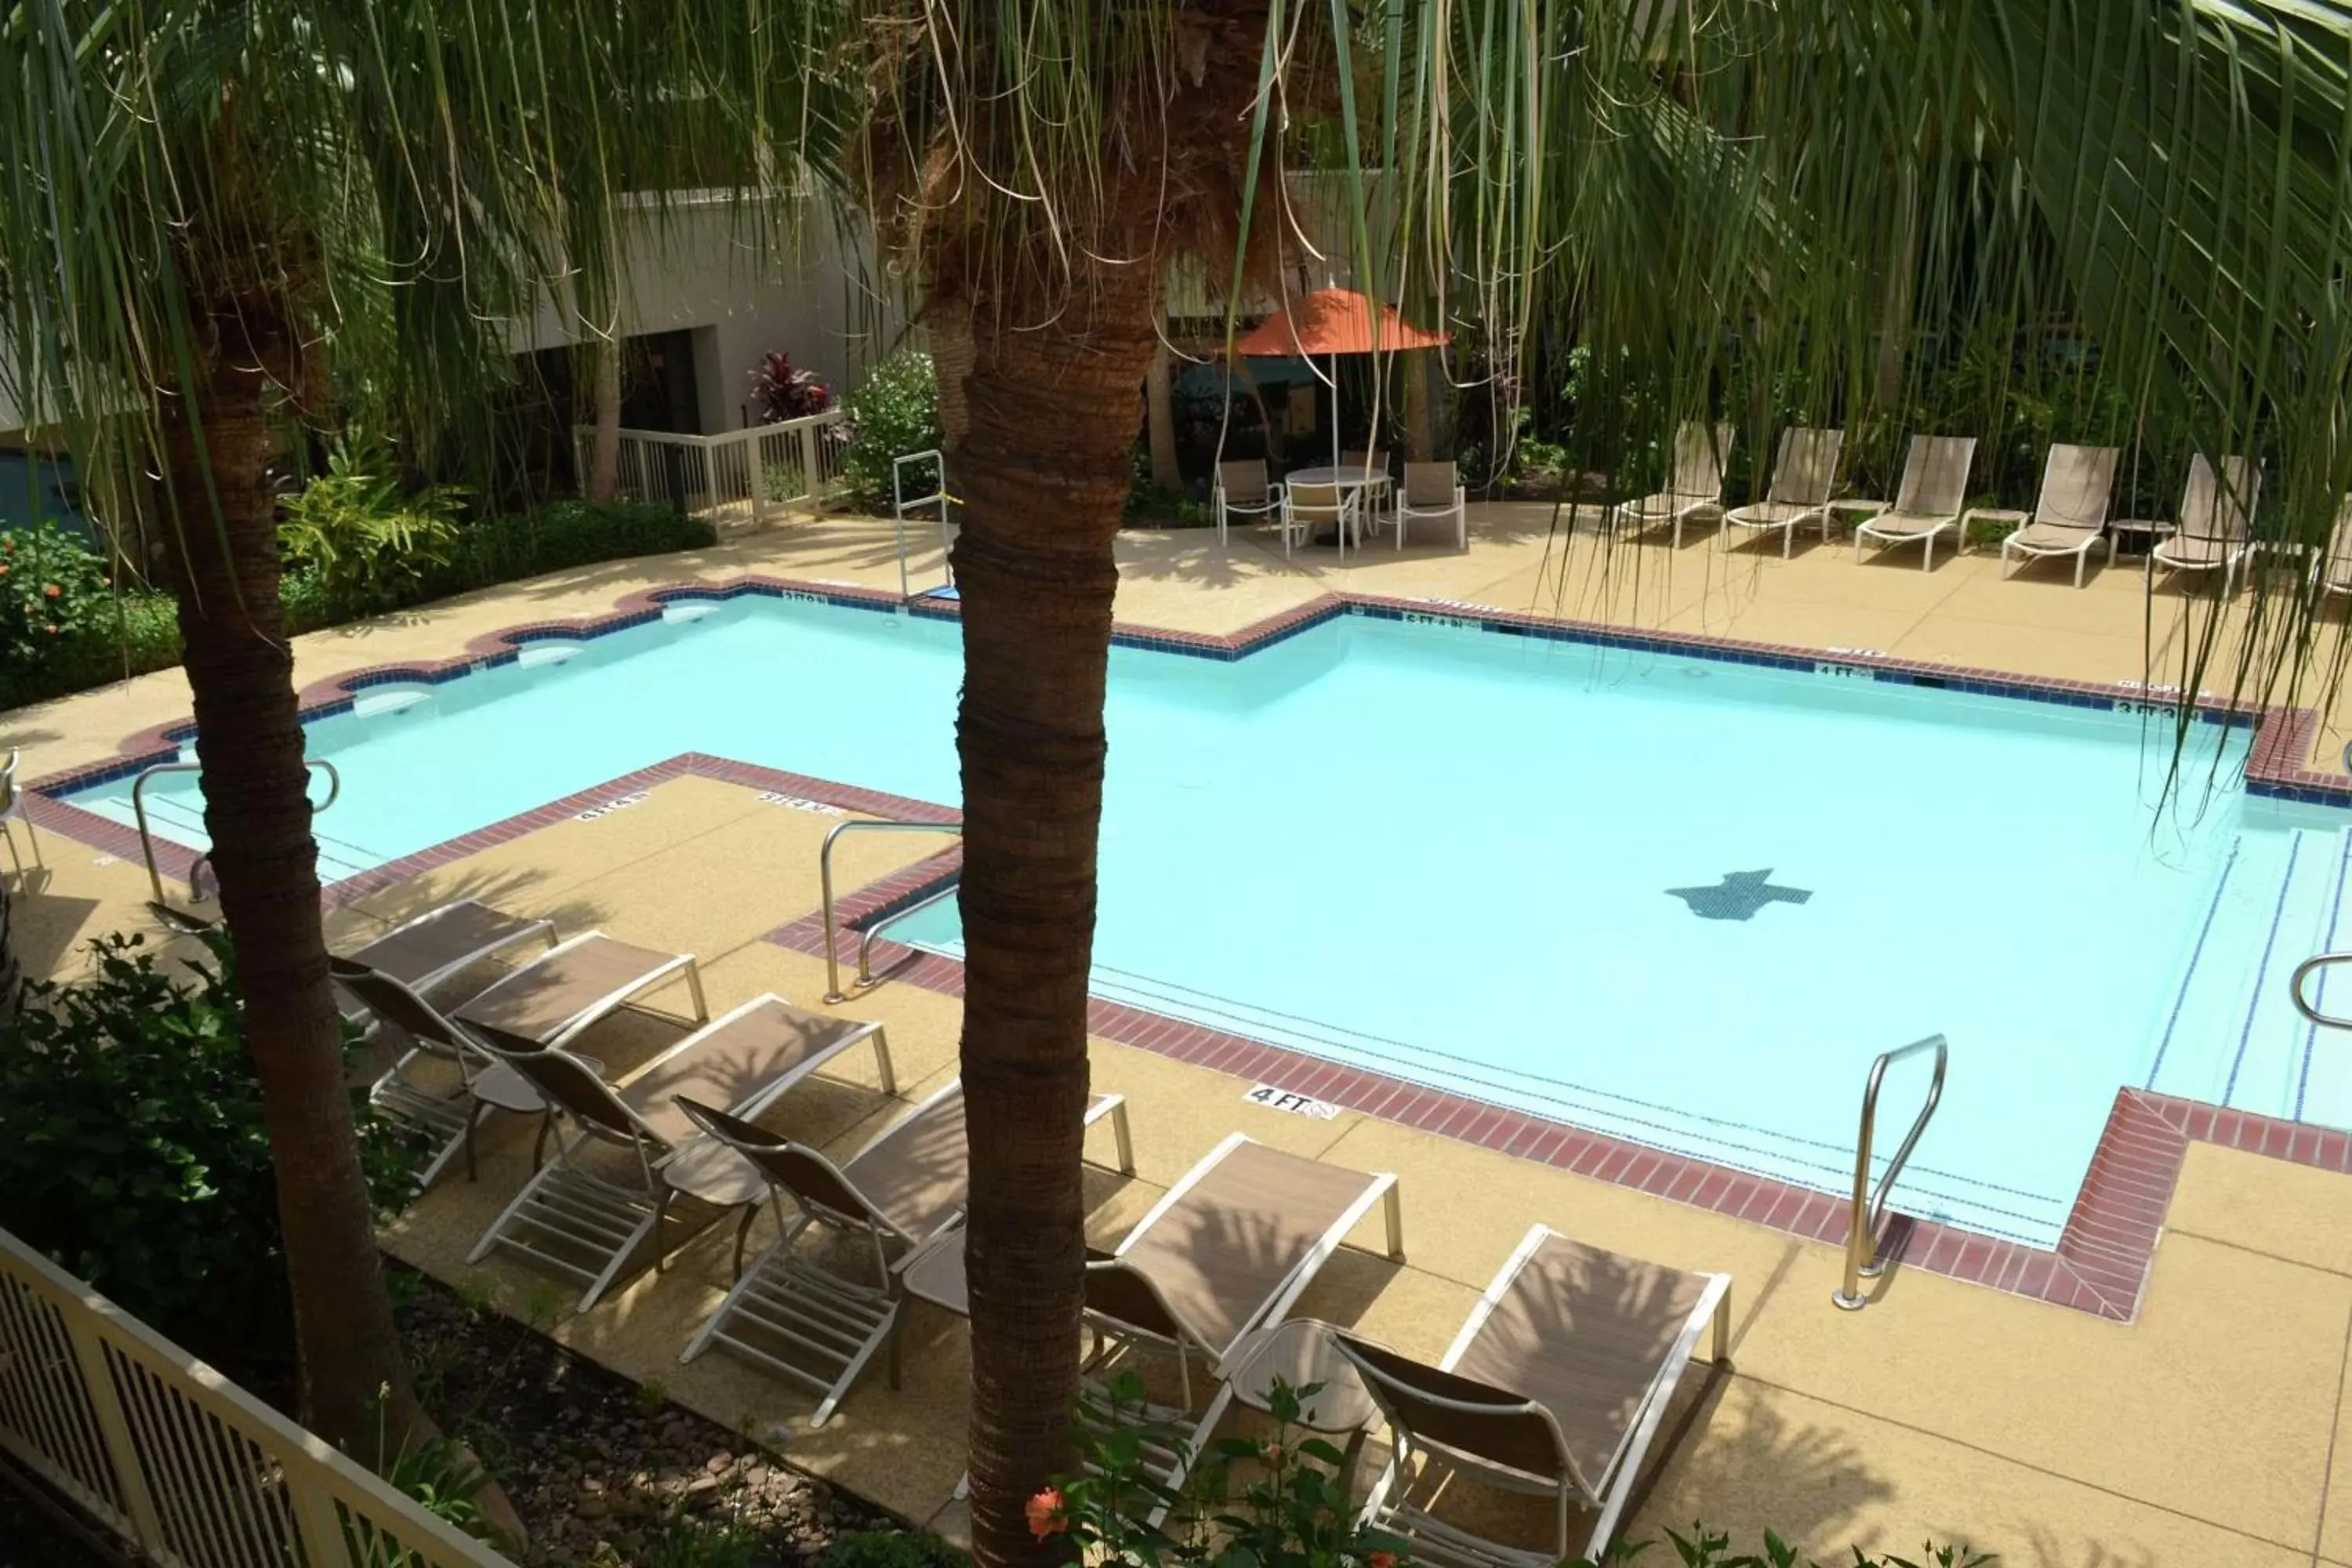 Property building, Pool View in DoubleTree by Hilton Hotel Houston Hobby Airport